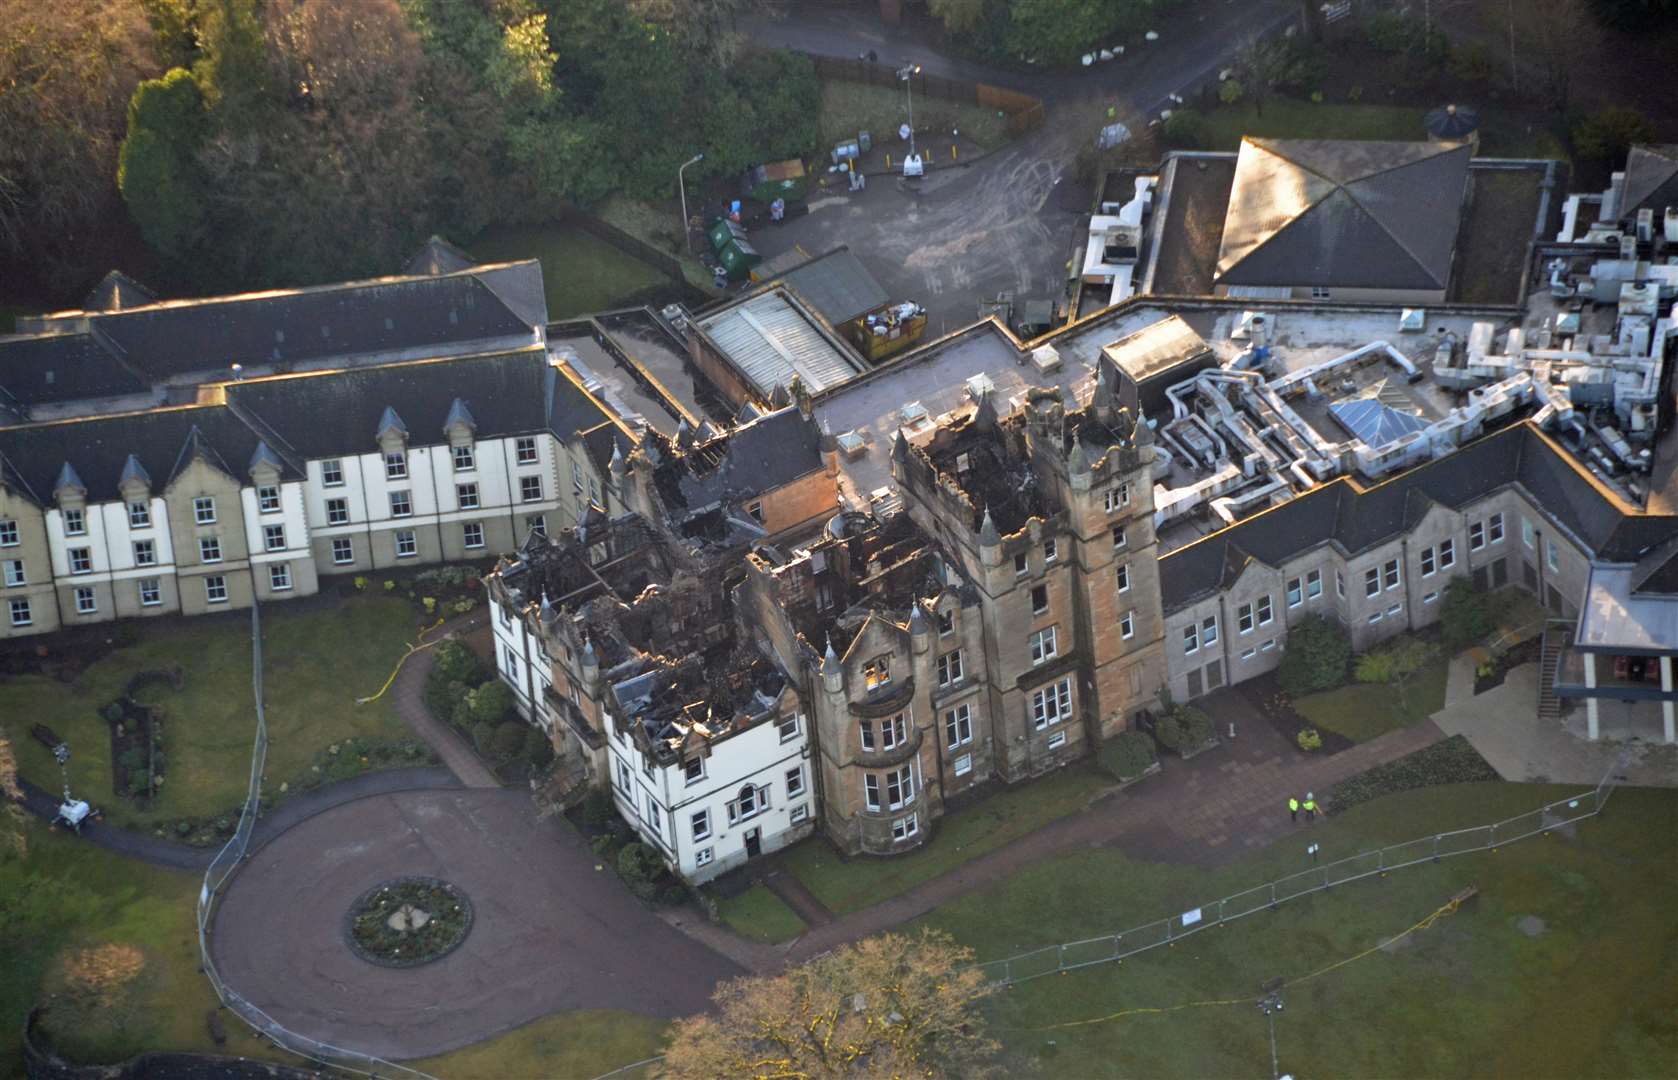 The luxury hotel was badly damaged in the fatal fire (Crown Office/PA)